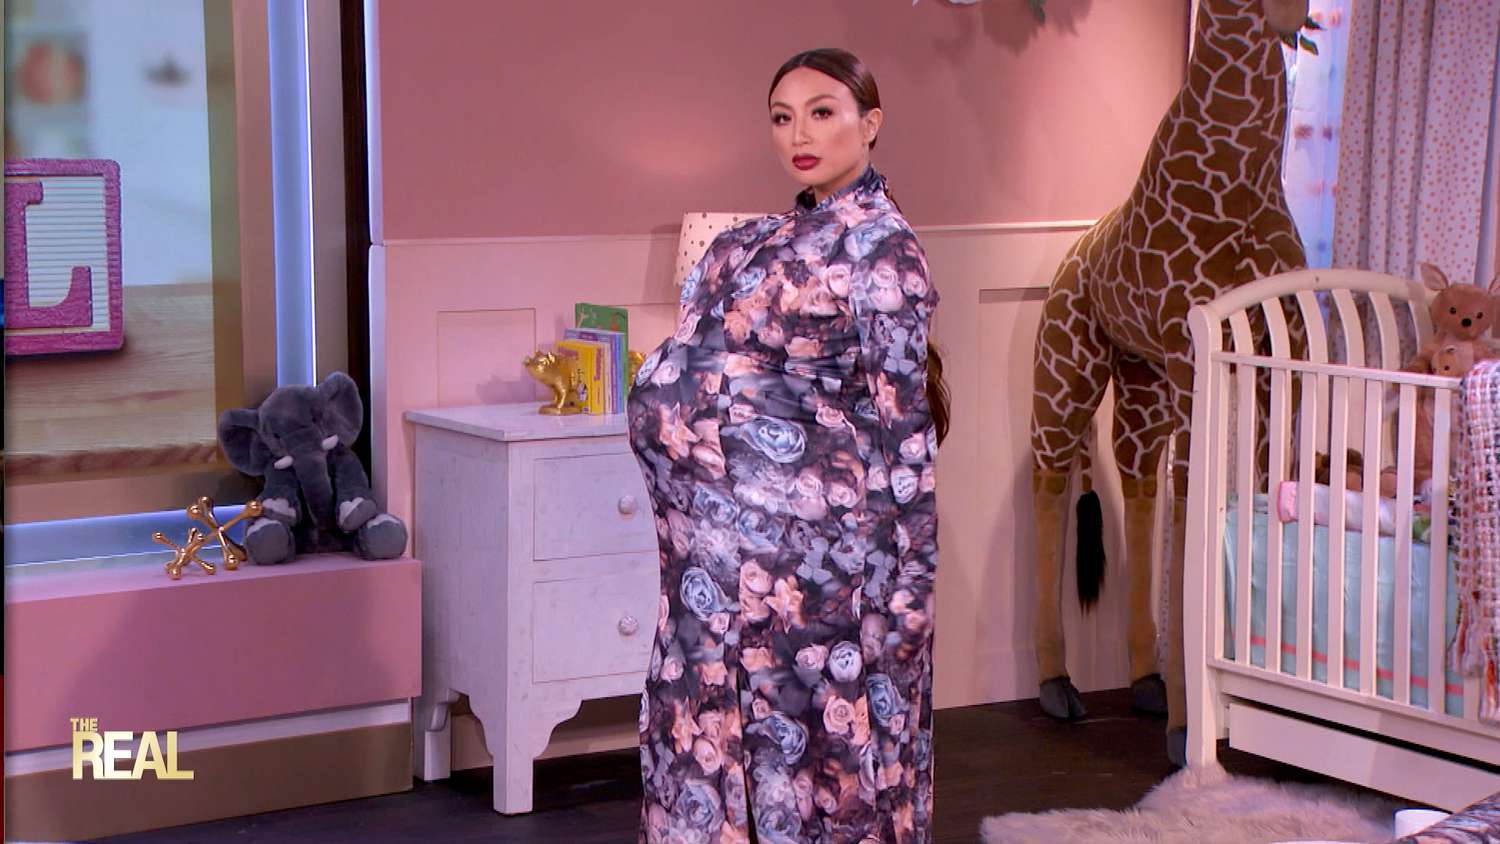 There’s a special delivery on THE REAL’s Halloween episode airing Friday, October 29 where the hosts pay homage to some of Hollywood’s greatest expectant parents, including Jeannie Mai Jenkins as Kim Kardashian West at the Met Gala, Loni Love as Lil Nas X pregnant with his latest album, “Montero,” Adrienne Houghton as Cardi B revealing she’s pregnant on SNL and Garcelle Beauvais as Nadya “Octomom” Suleman. Credit: The Real